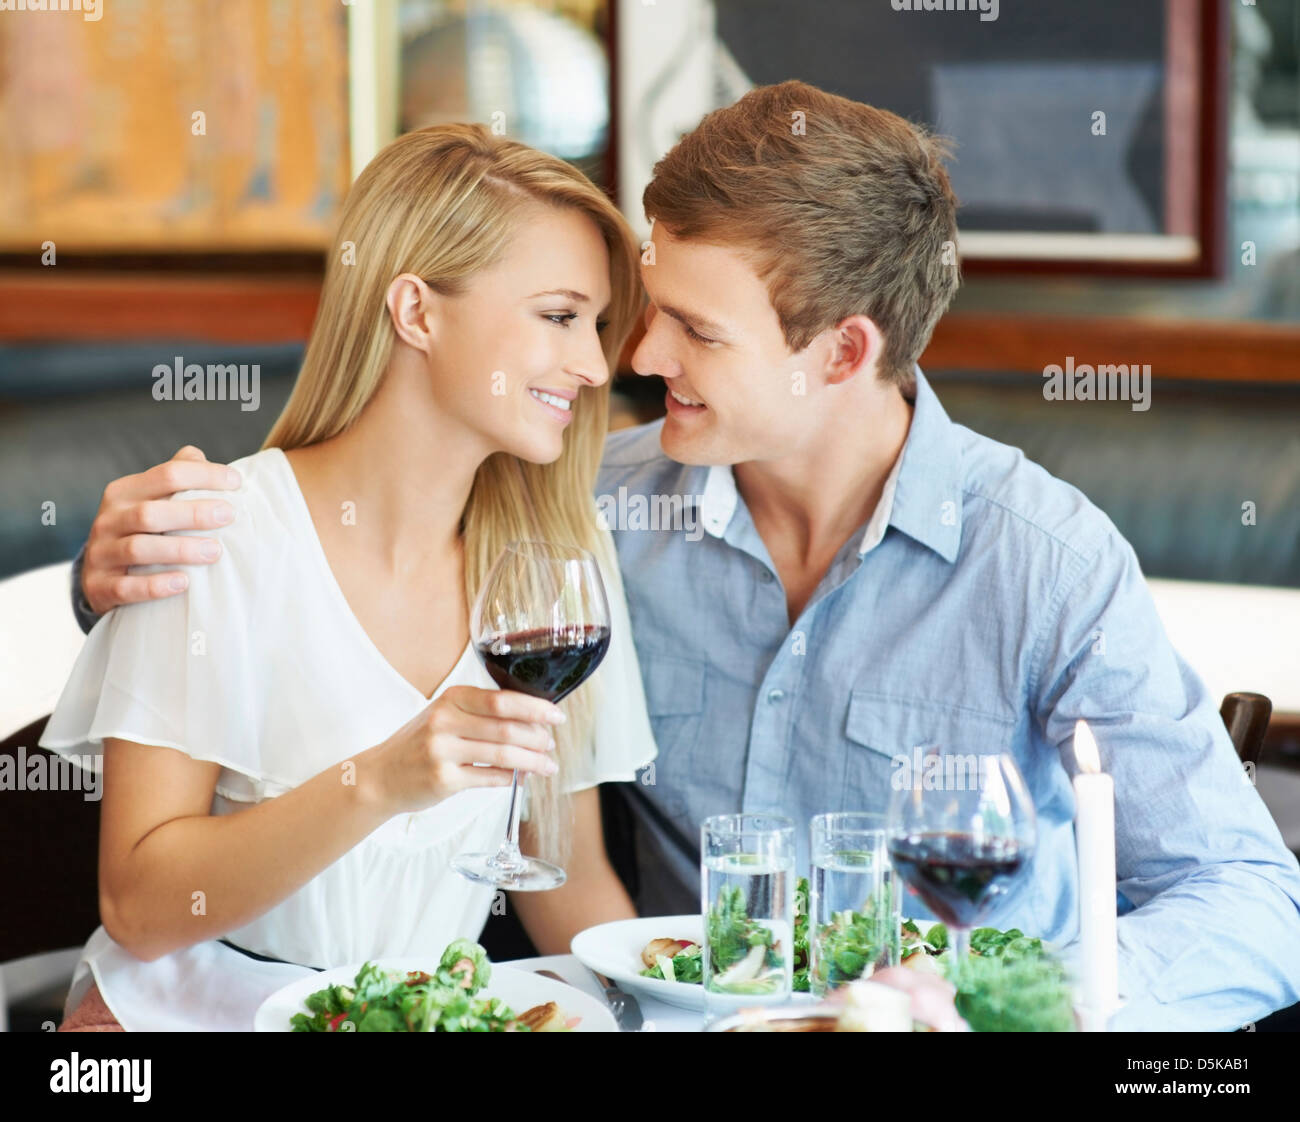 Couple drinking wine in restaurant Banque D'Images